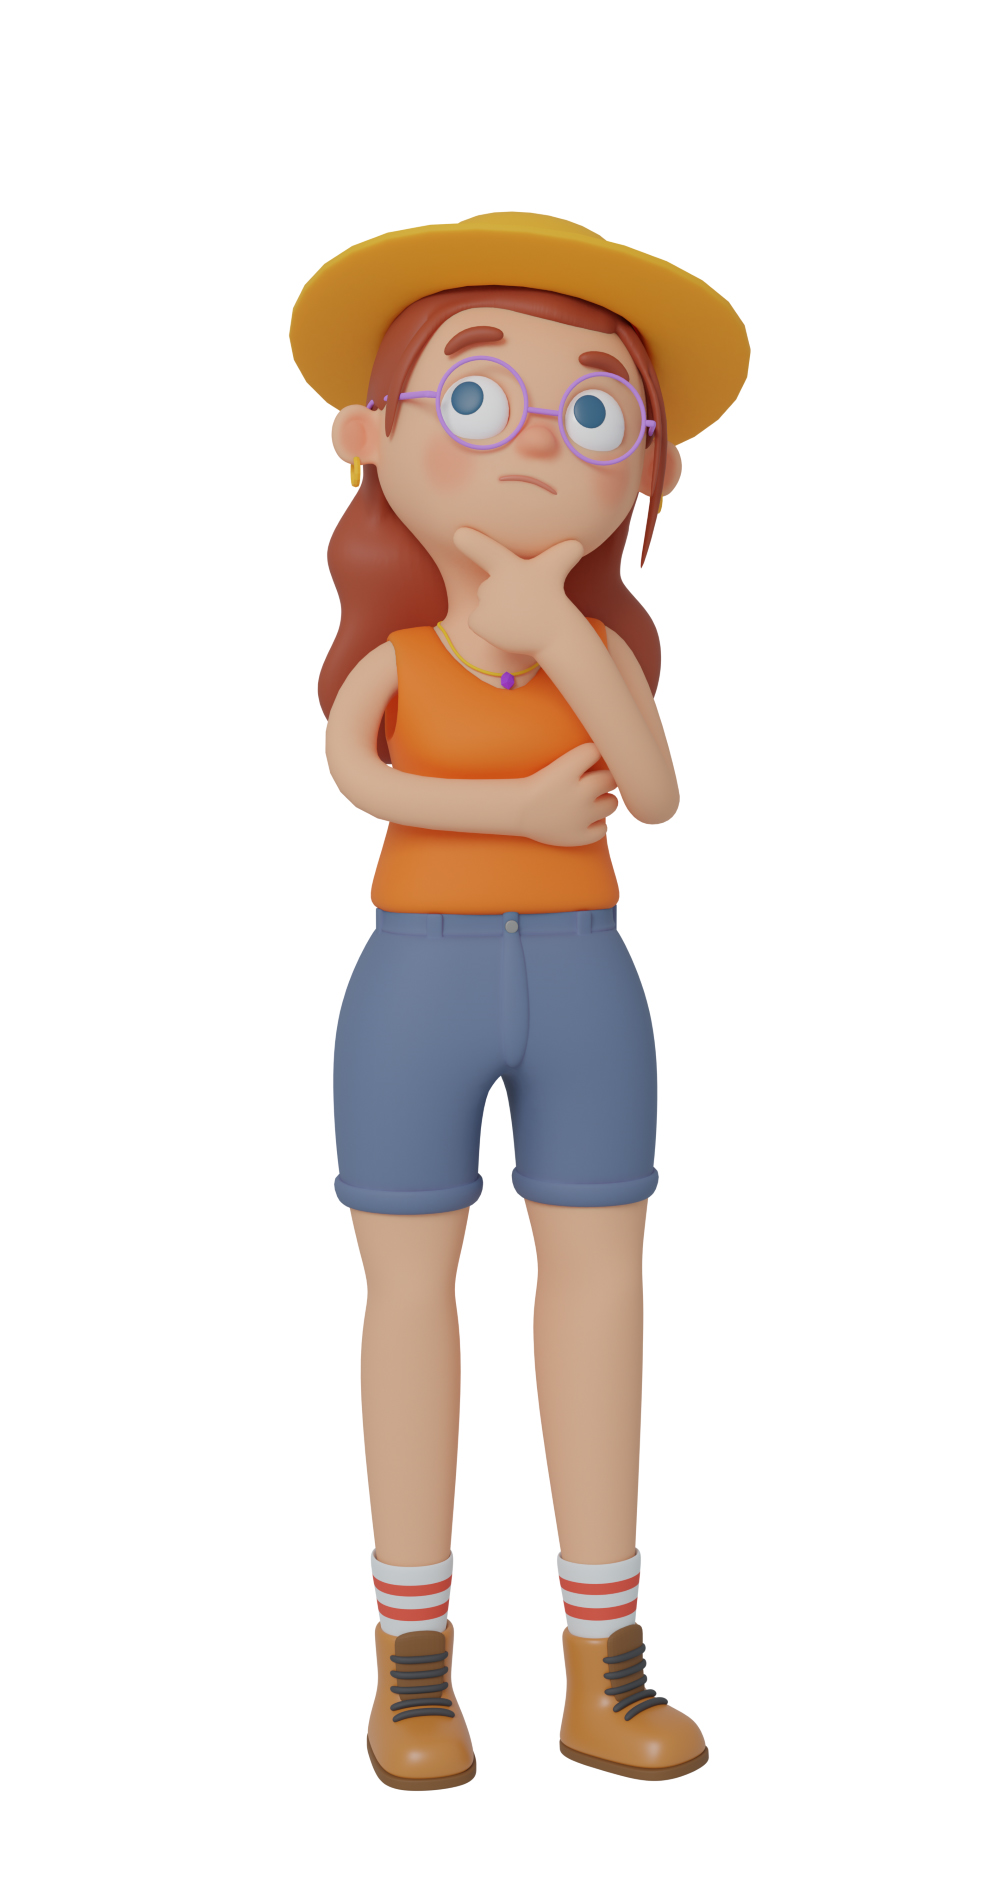 3d character design of a girl doing a thinking gesture